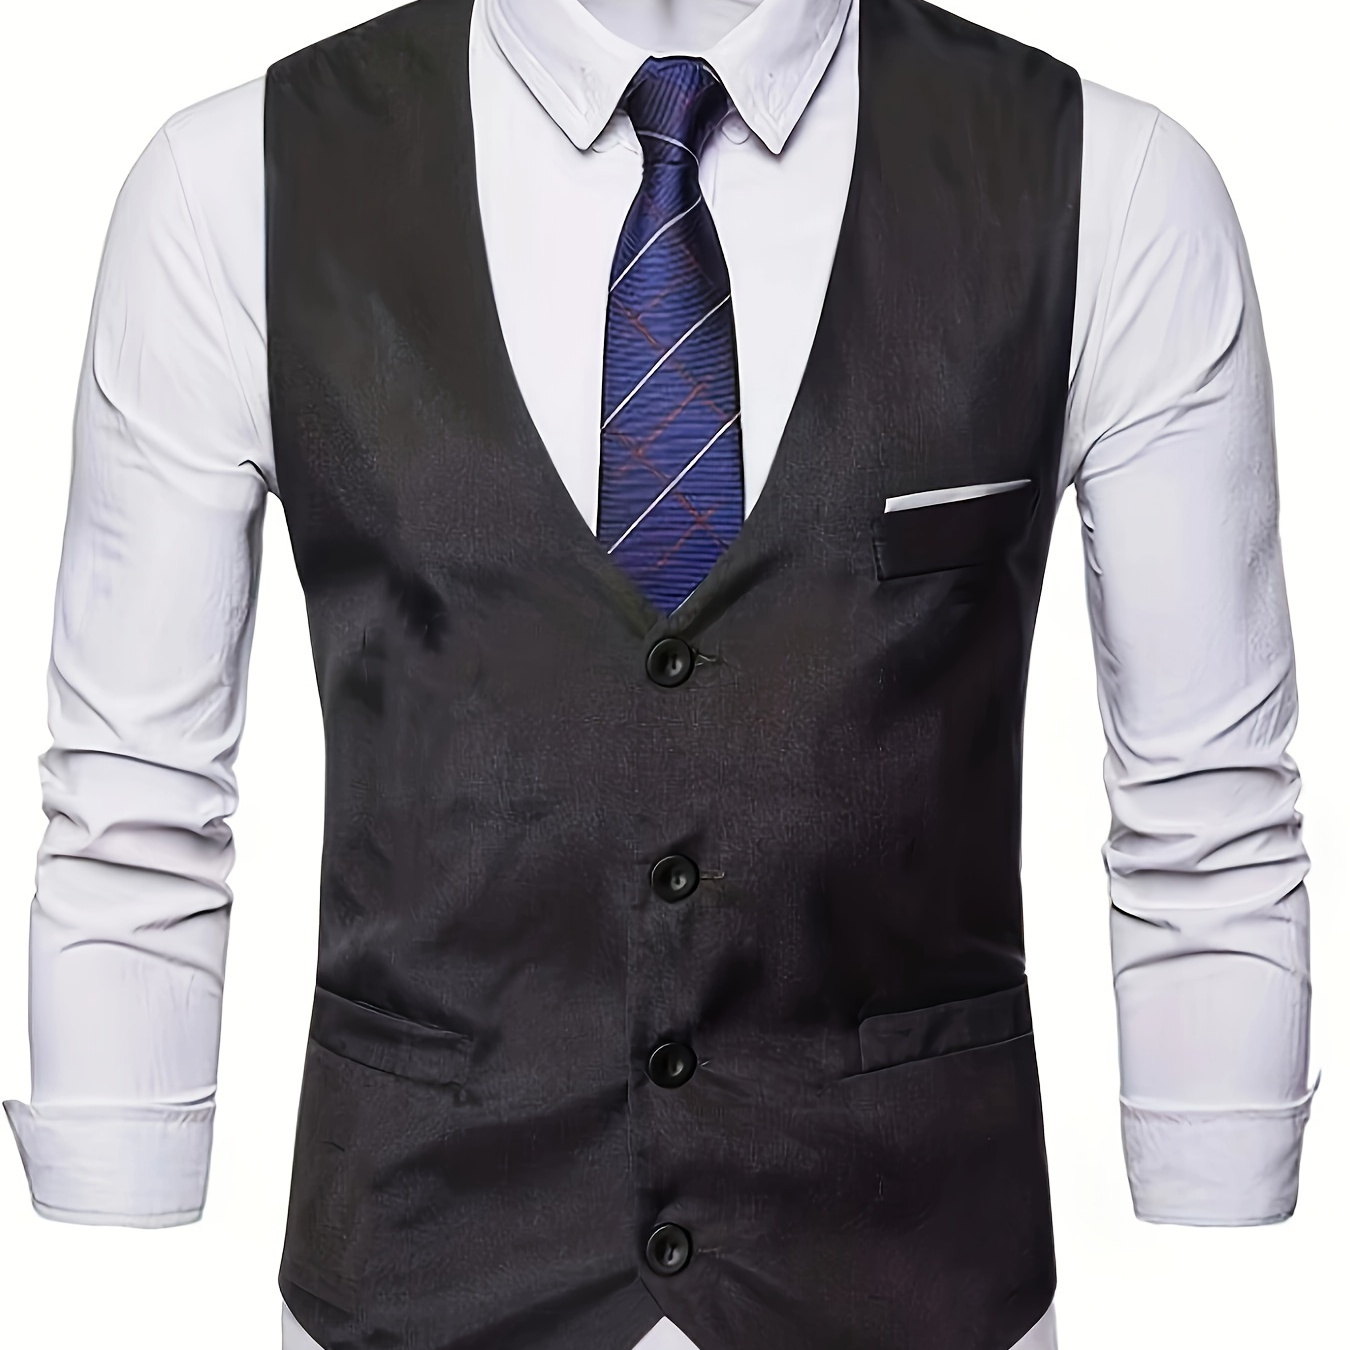 

V Neck Smart Suit Vest, Men's Casual Retro Style Solid Color Single Breasted Waistcoat For Wedding Dinner Suit Match